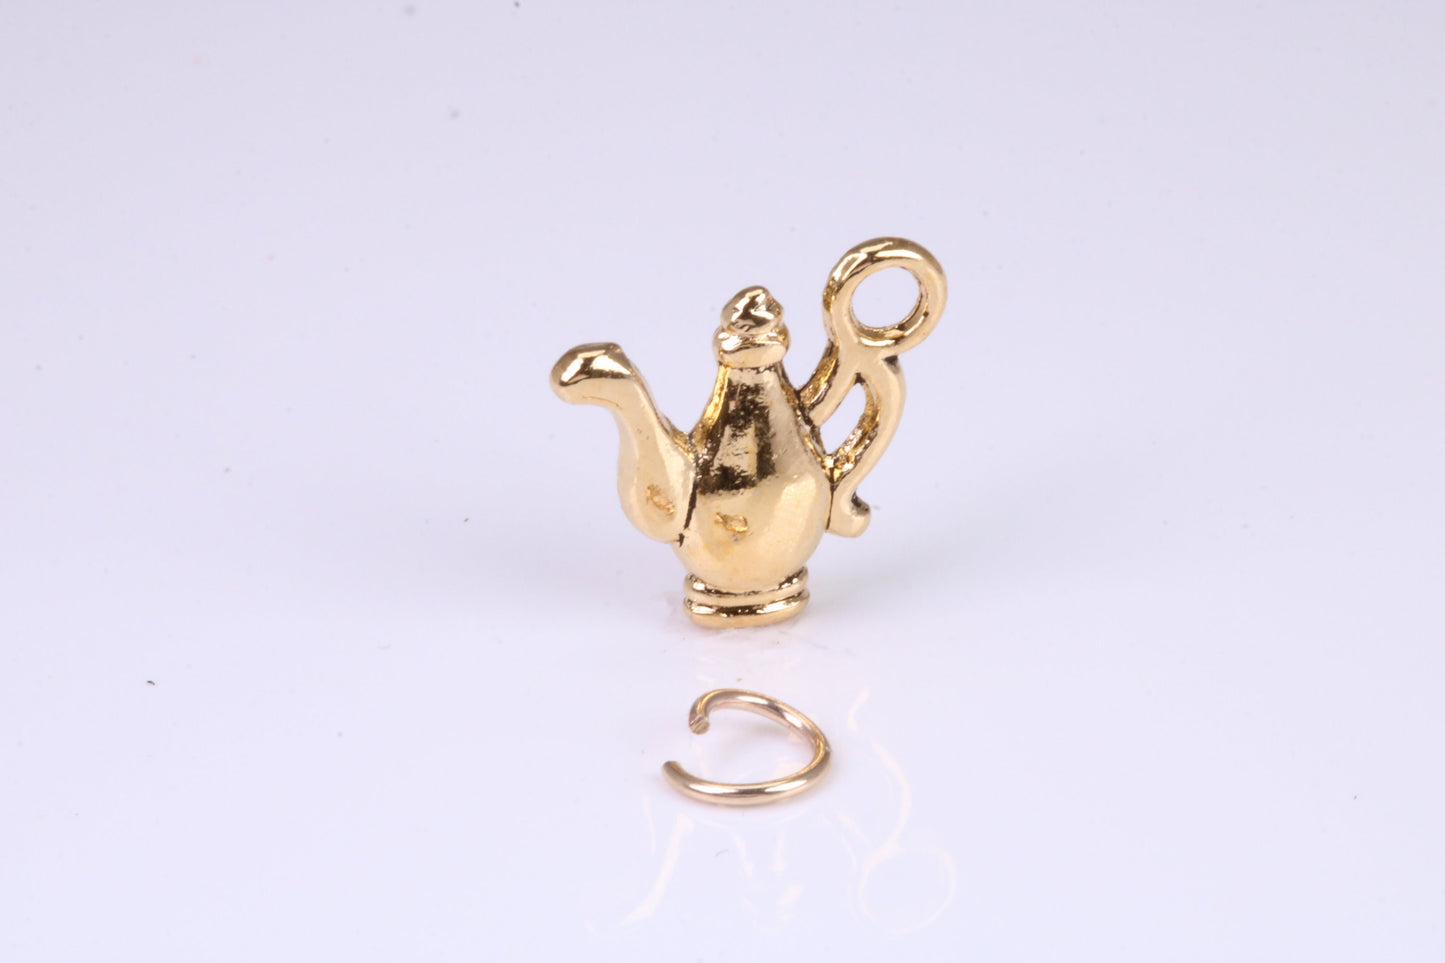 Teapot Charm, Traditional Charm, Made from Solid Yellow Gold, British Hallmarked, Complete with Attachment Link